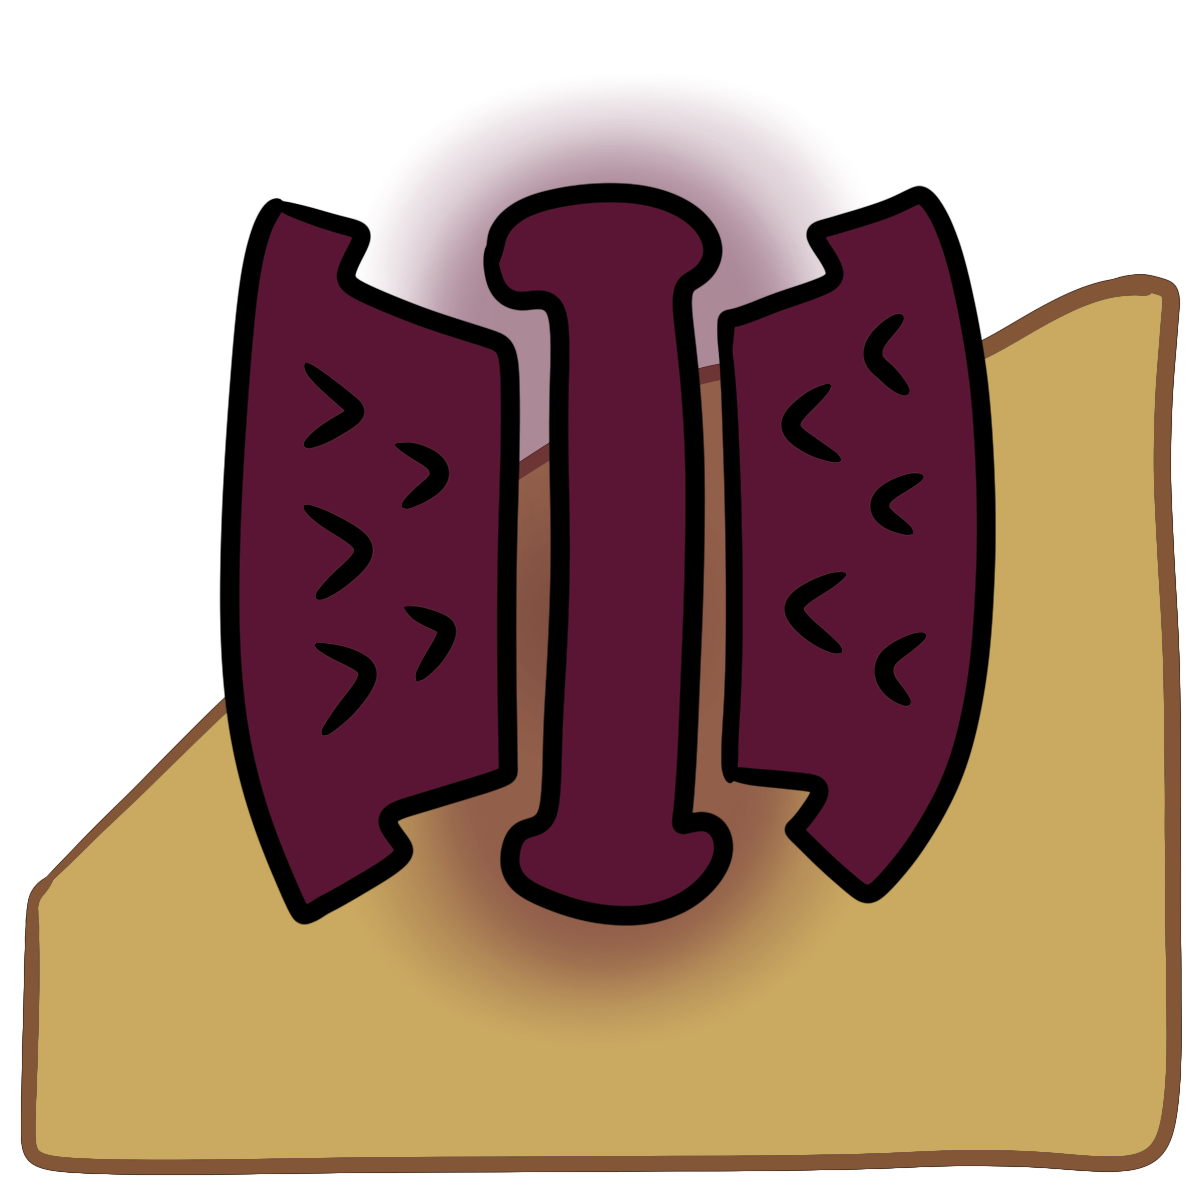 A dark magenta blob squeezed on both sides by anvil shaped blobs with carrot shapes pointing in. Curved yellow skin fills the bottom half of the background.